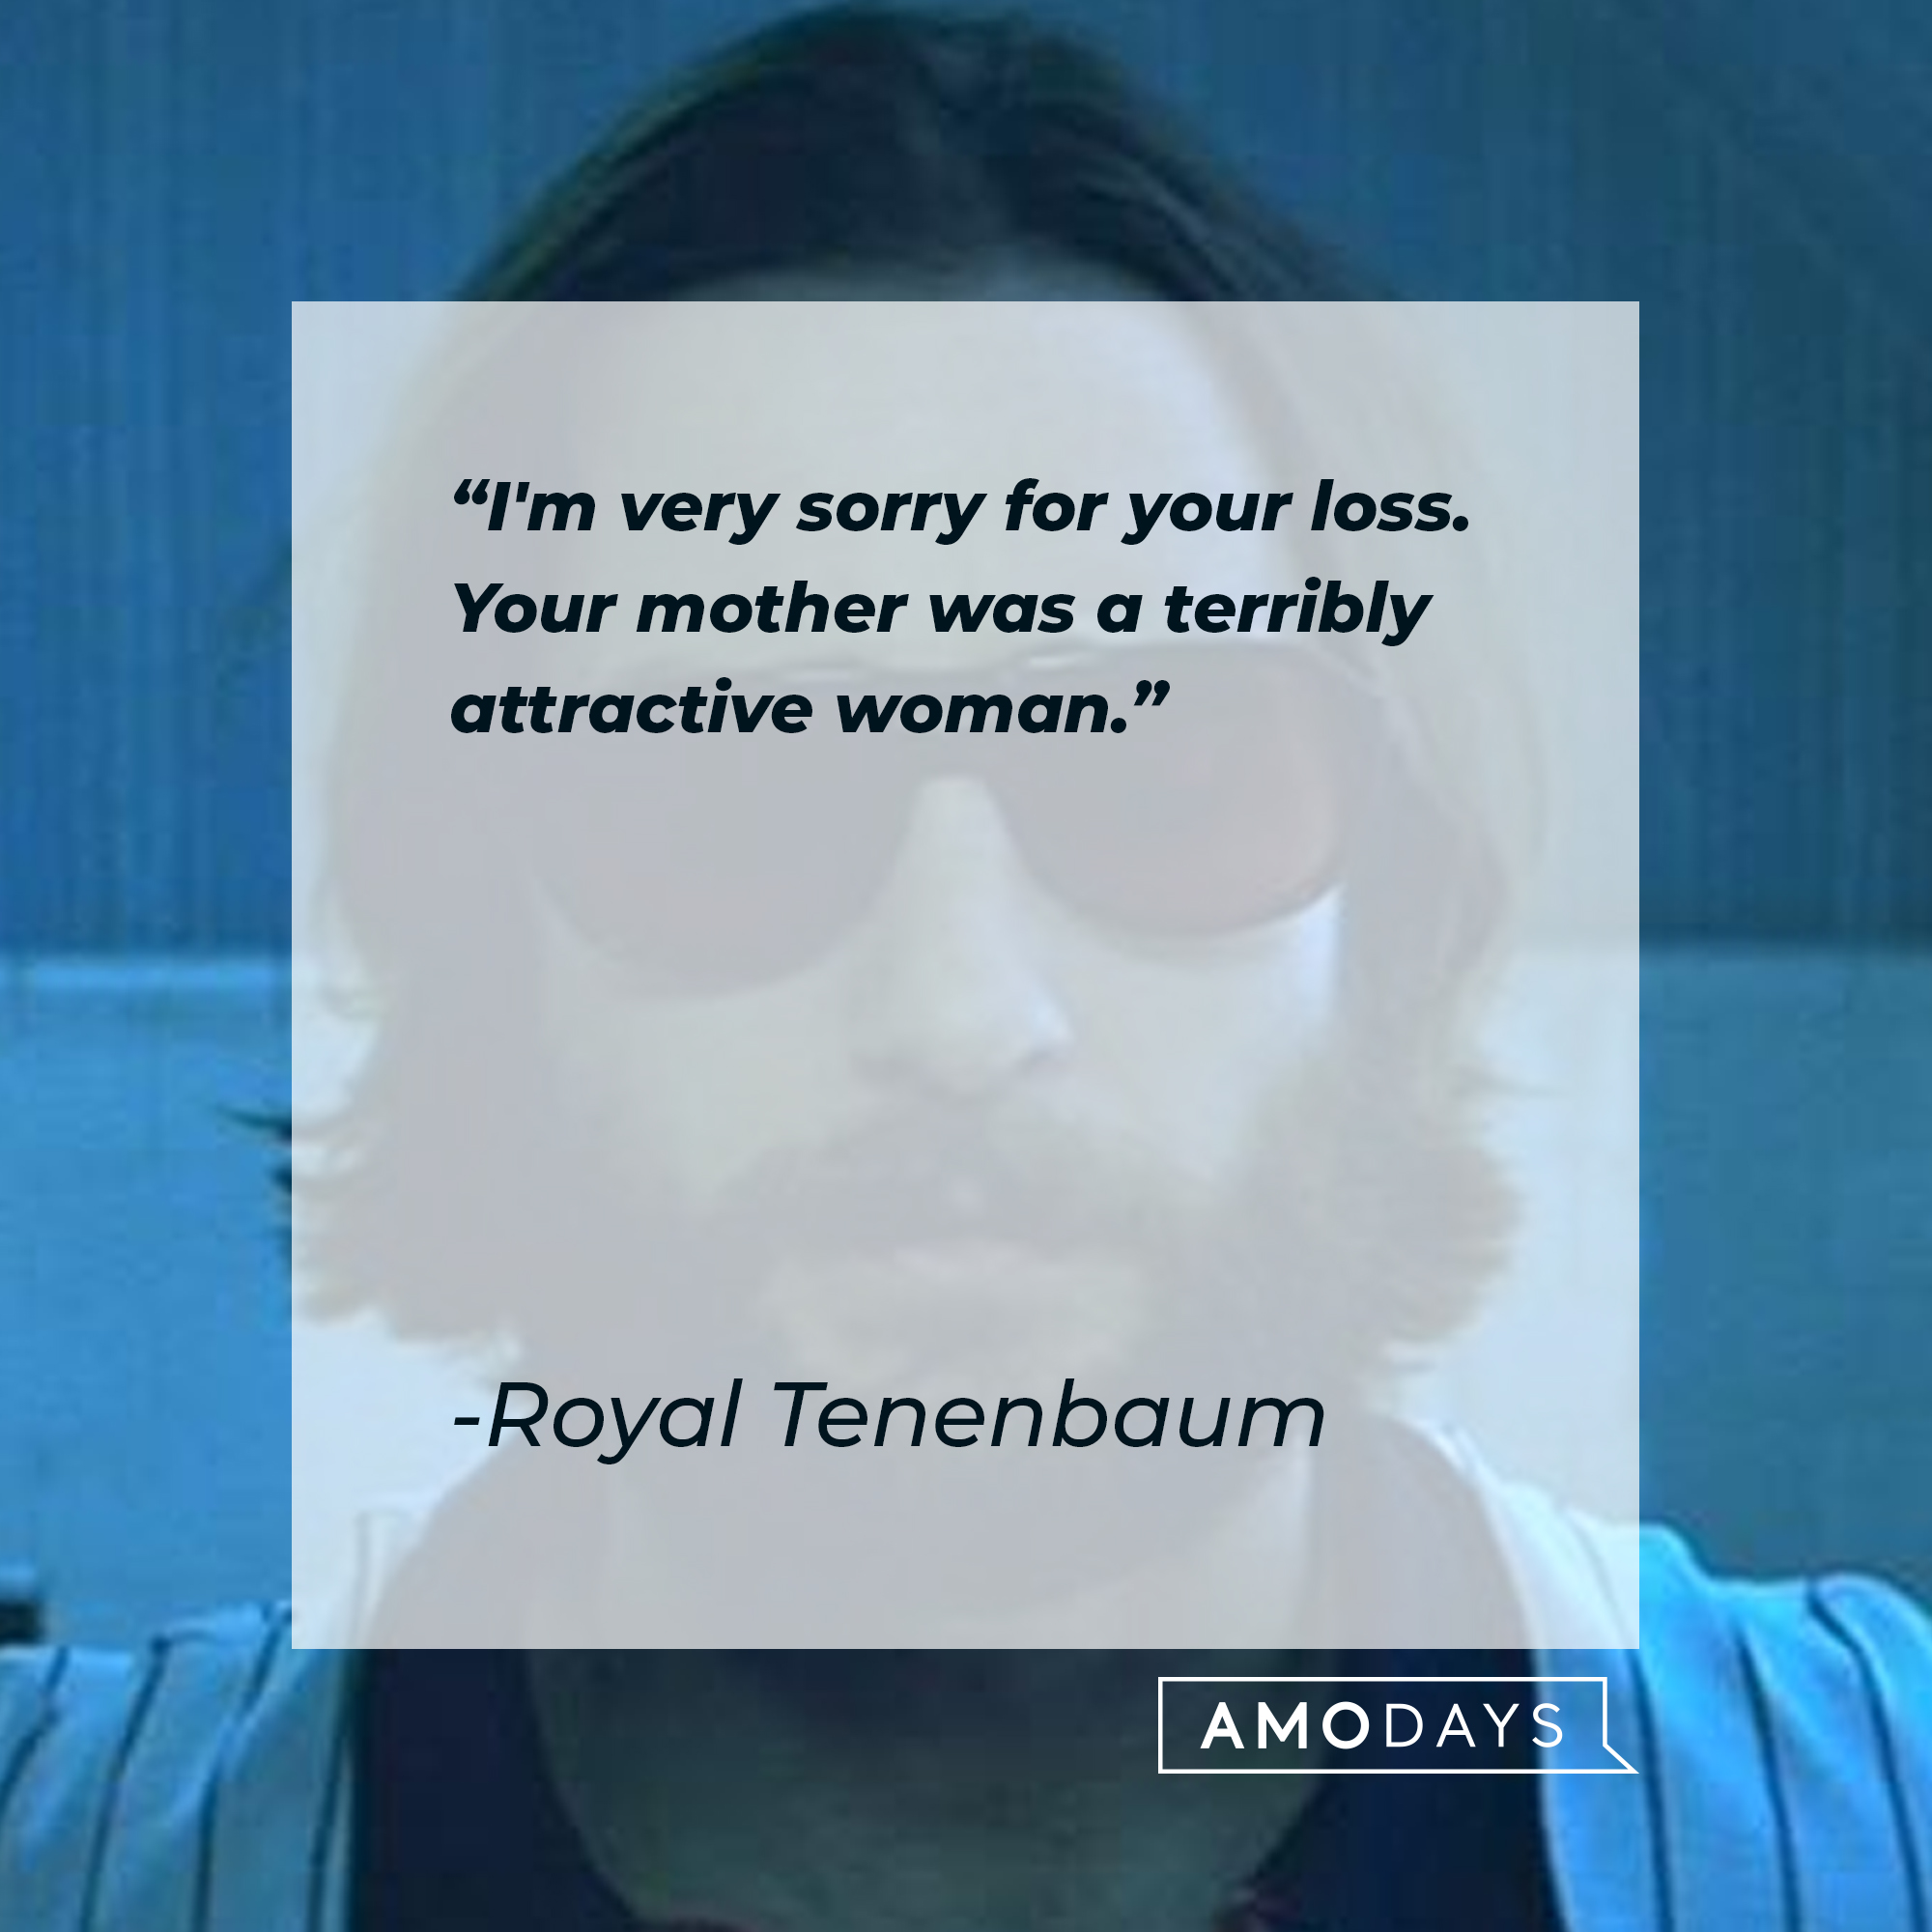 Royal Tenenbaum's quote: "I'm very sorry for your loss. Your mother was a terribly attractive woman." | Image: AmoDays